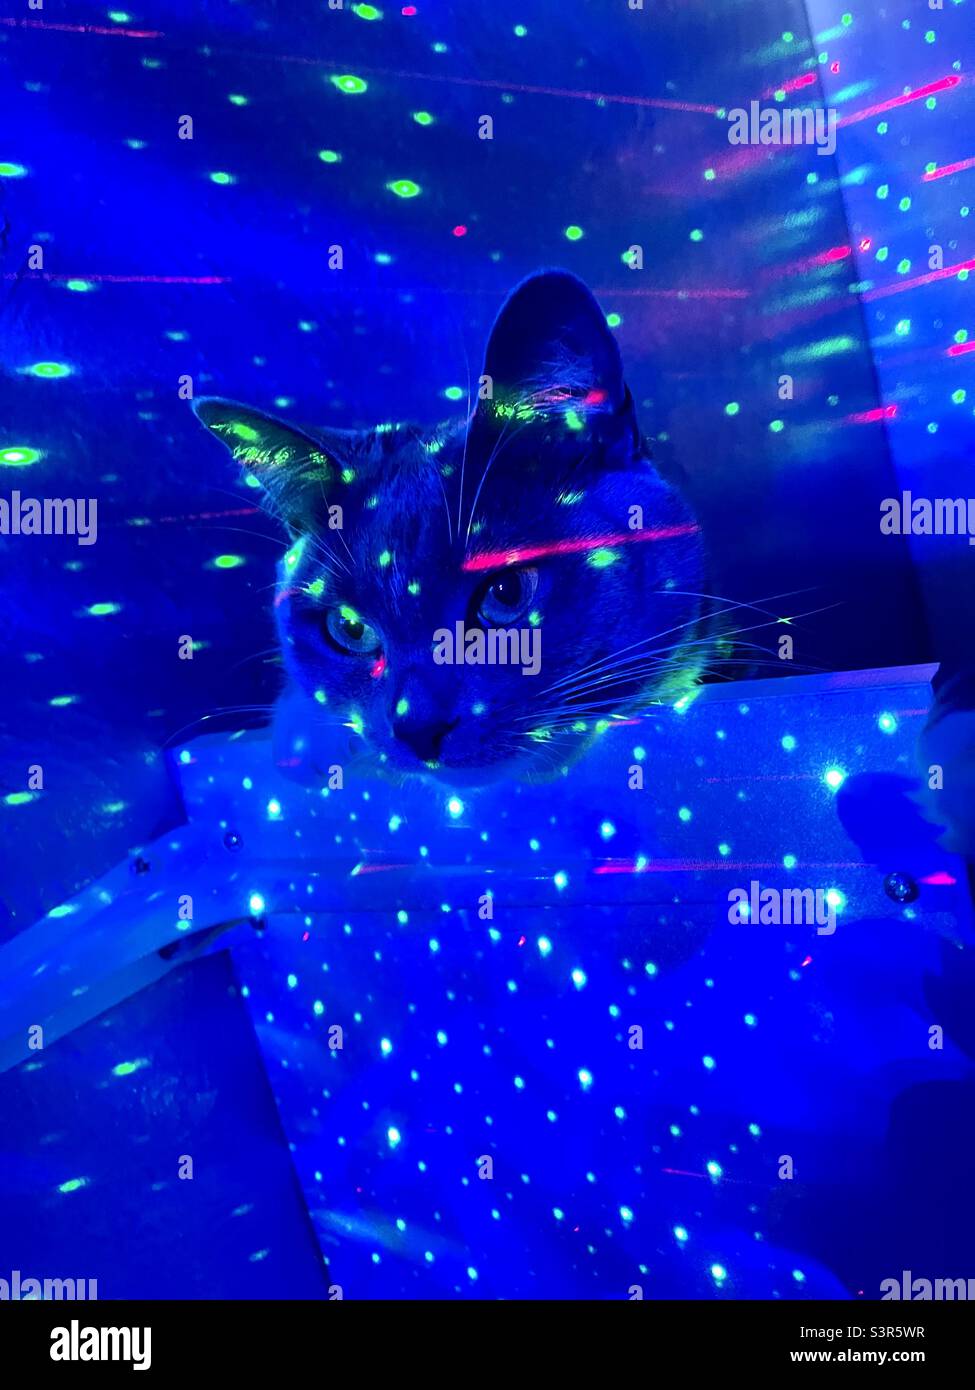 Cat head hanging over shelf in dark room with light projector, deep blue, neon green, red lines, nightclub space galaxy stars dark contrast colorful Stock Photo